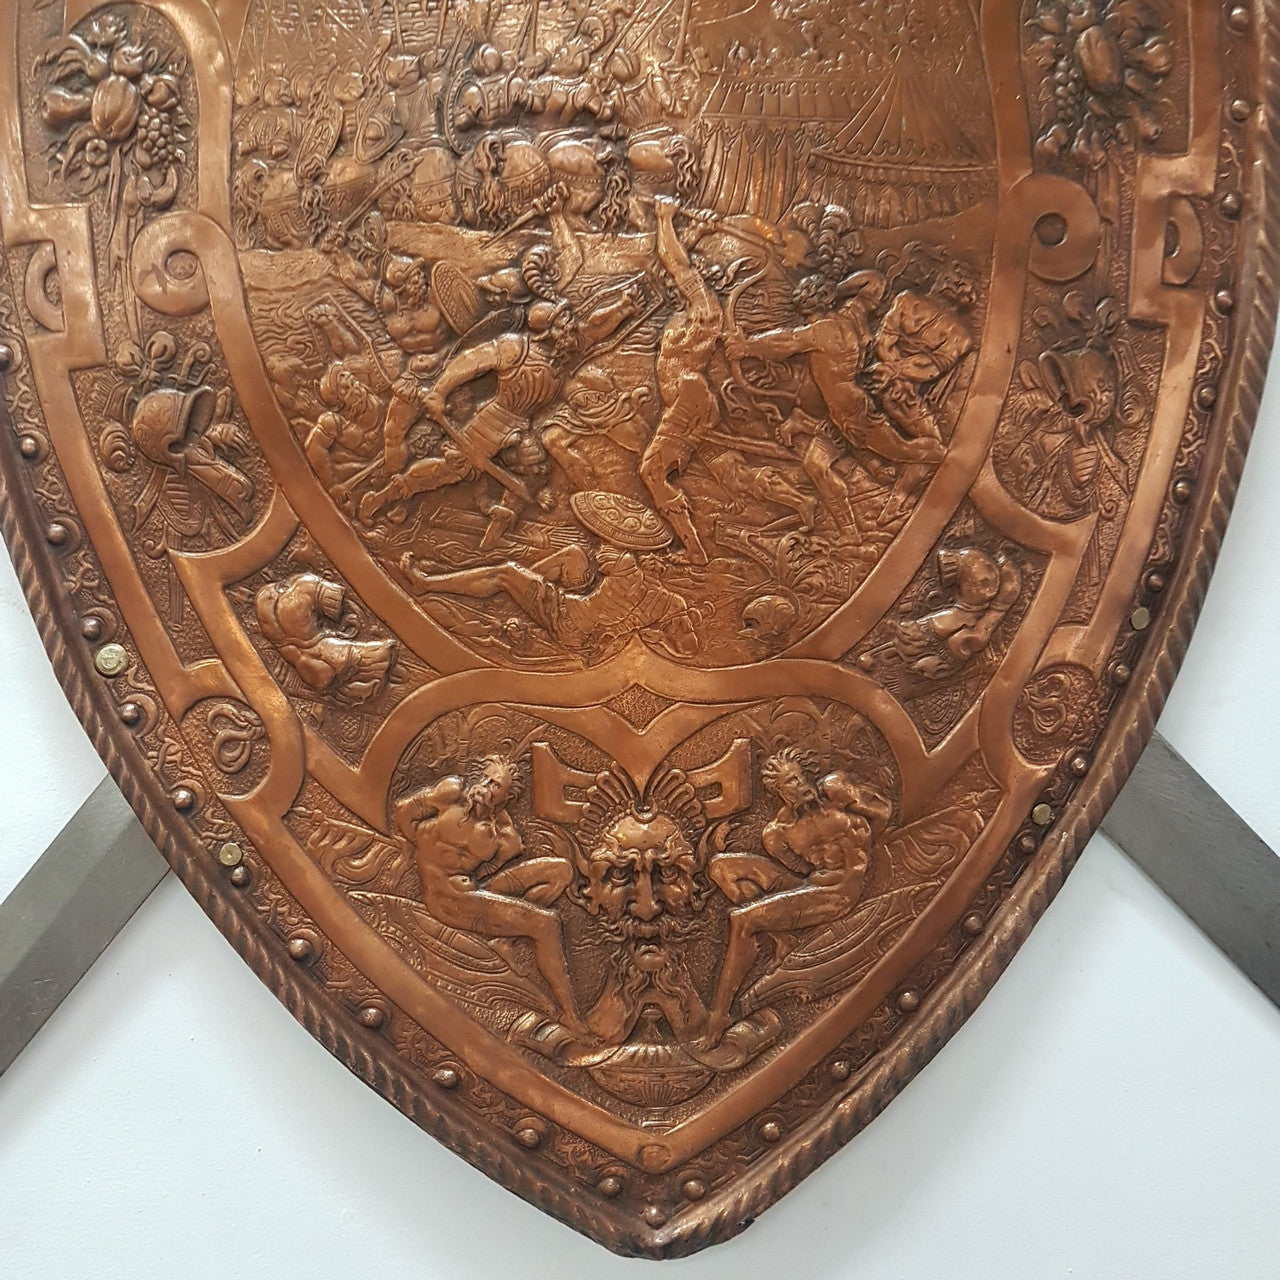 A beautiful European Antique highly detailed embossed copper shield with swords. Look closely to see the amazing detail in the shield of a fighting scene. It has brass handles on the steel swords. Is in good original condition with a slight crack (see photo).